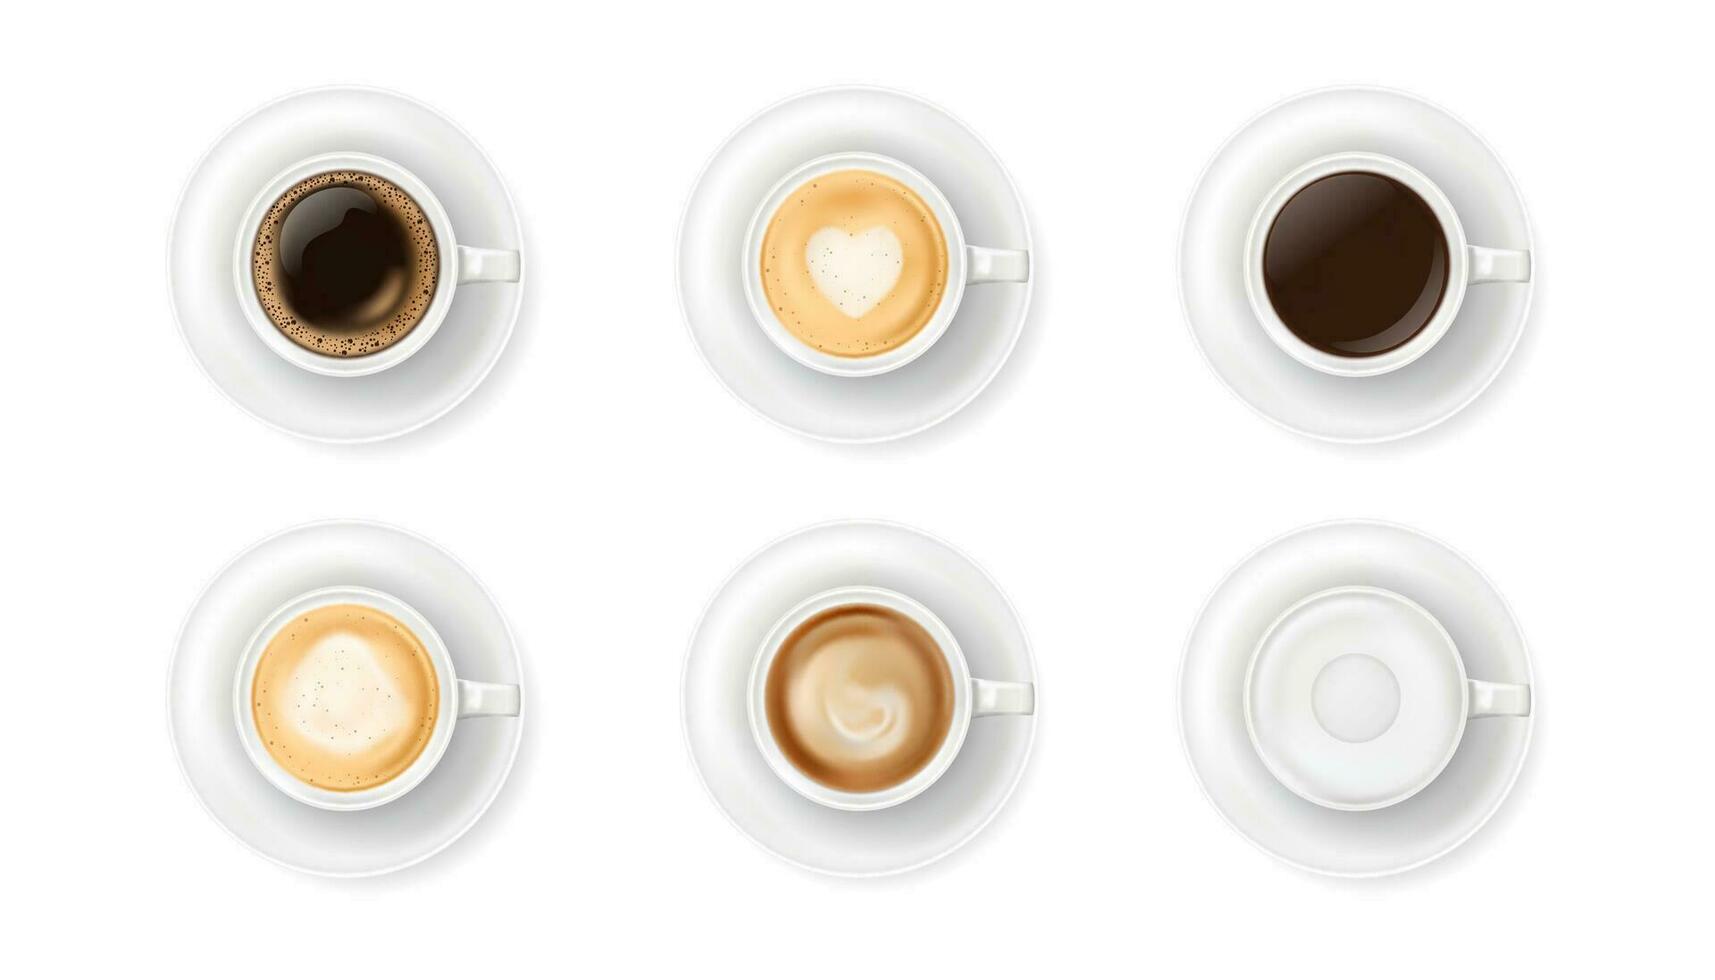 Top view at different white coffee cups on plates. Realistic vector illustration of various hot coffee drinks mugs - espresso, latte, cappuccino, americano. 3d caffeine beverage elements for cafe menu